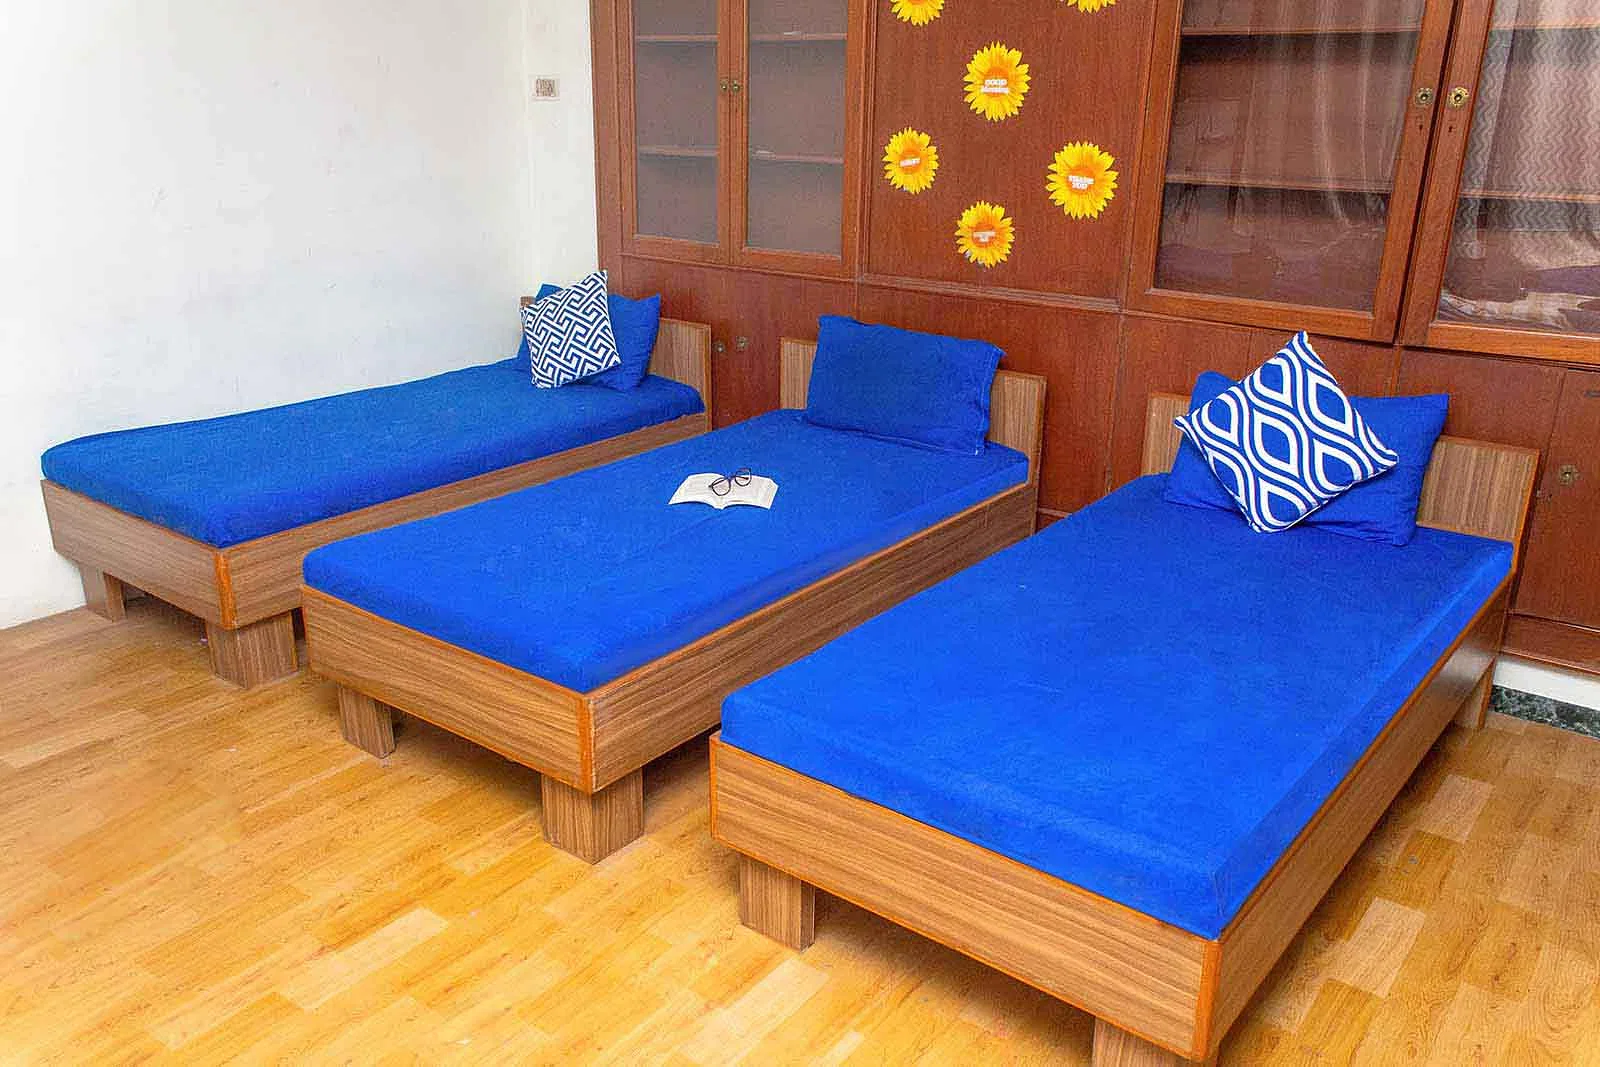 budget-friendly PGs and hostels for men with single rooms with daily hopusekeeping-Zolo Mayflower